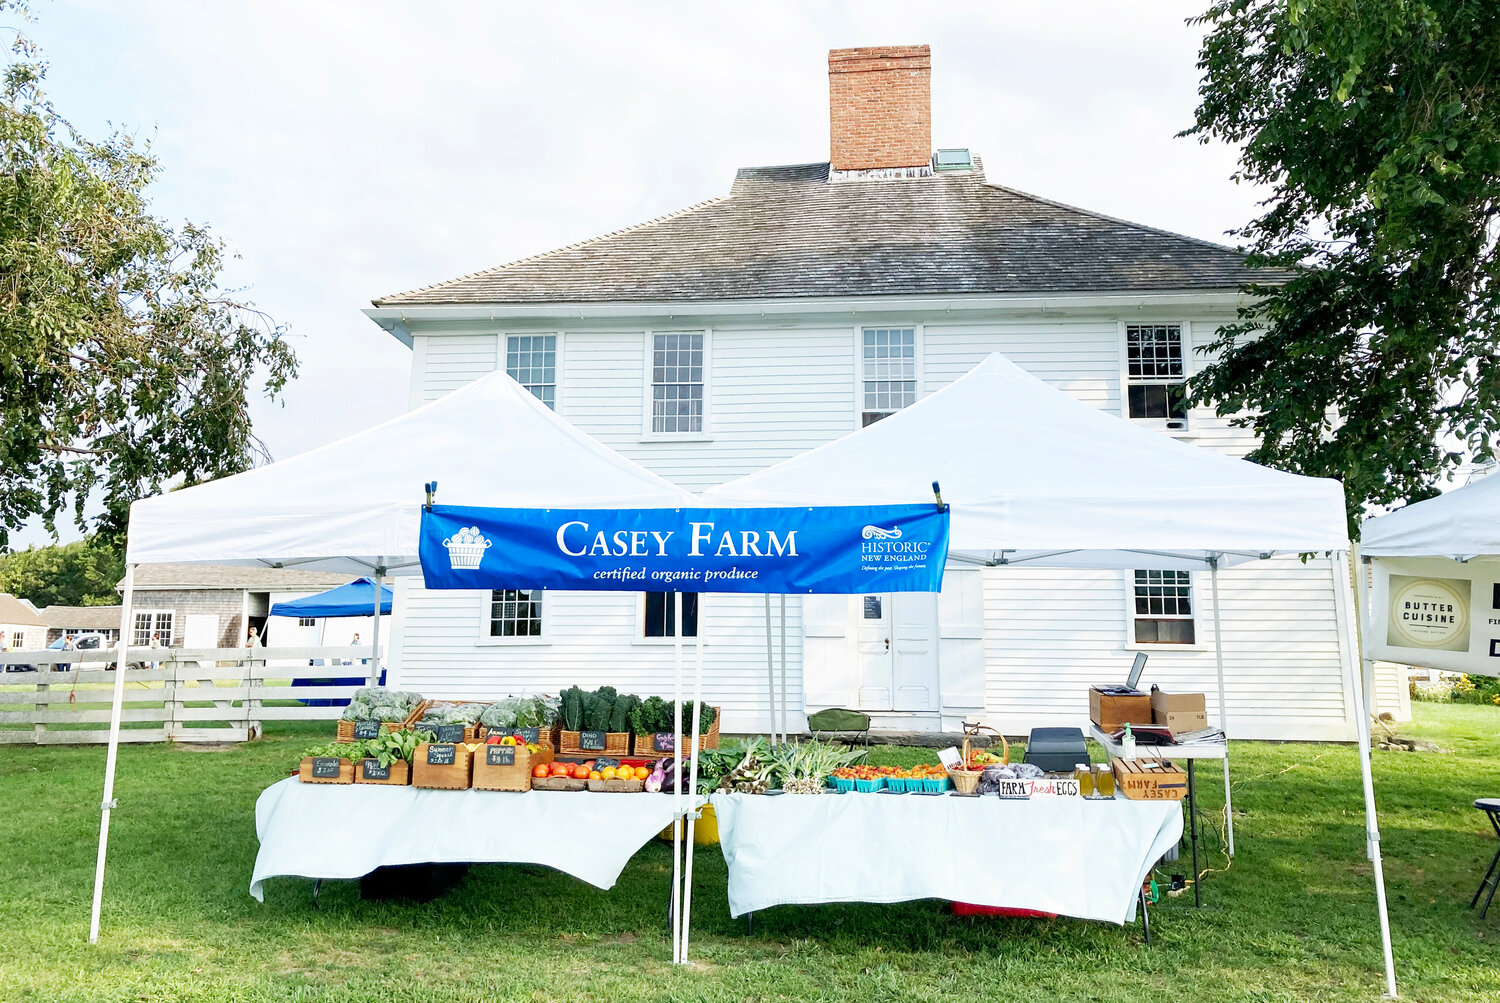 casey farm market is held saturdays through October 28 from 8:30am to 12:30pm